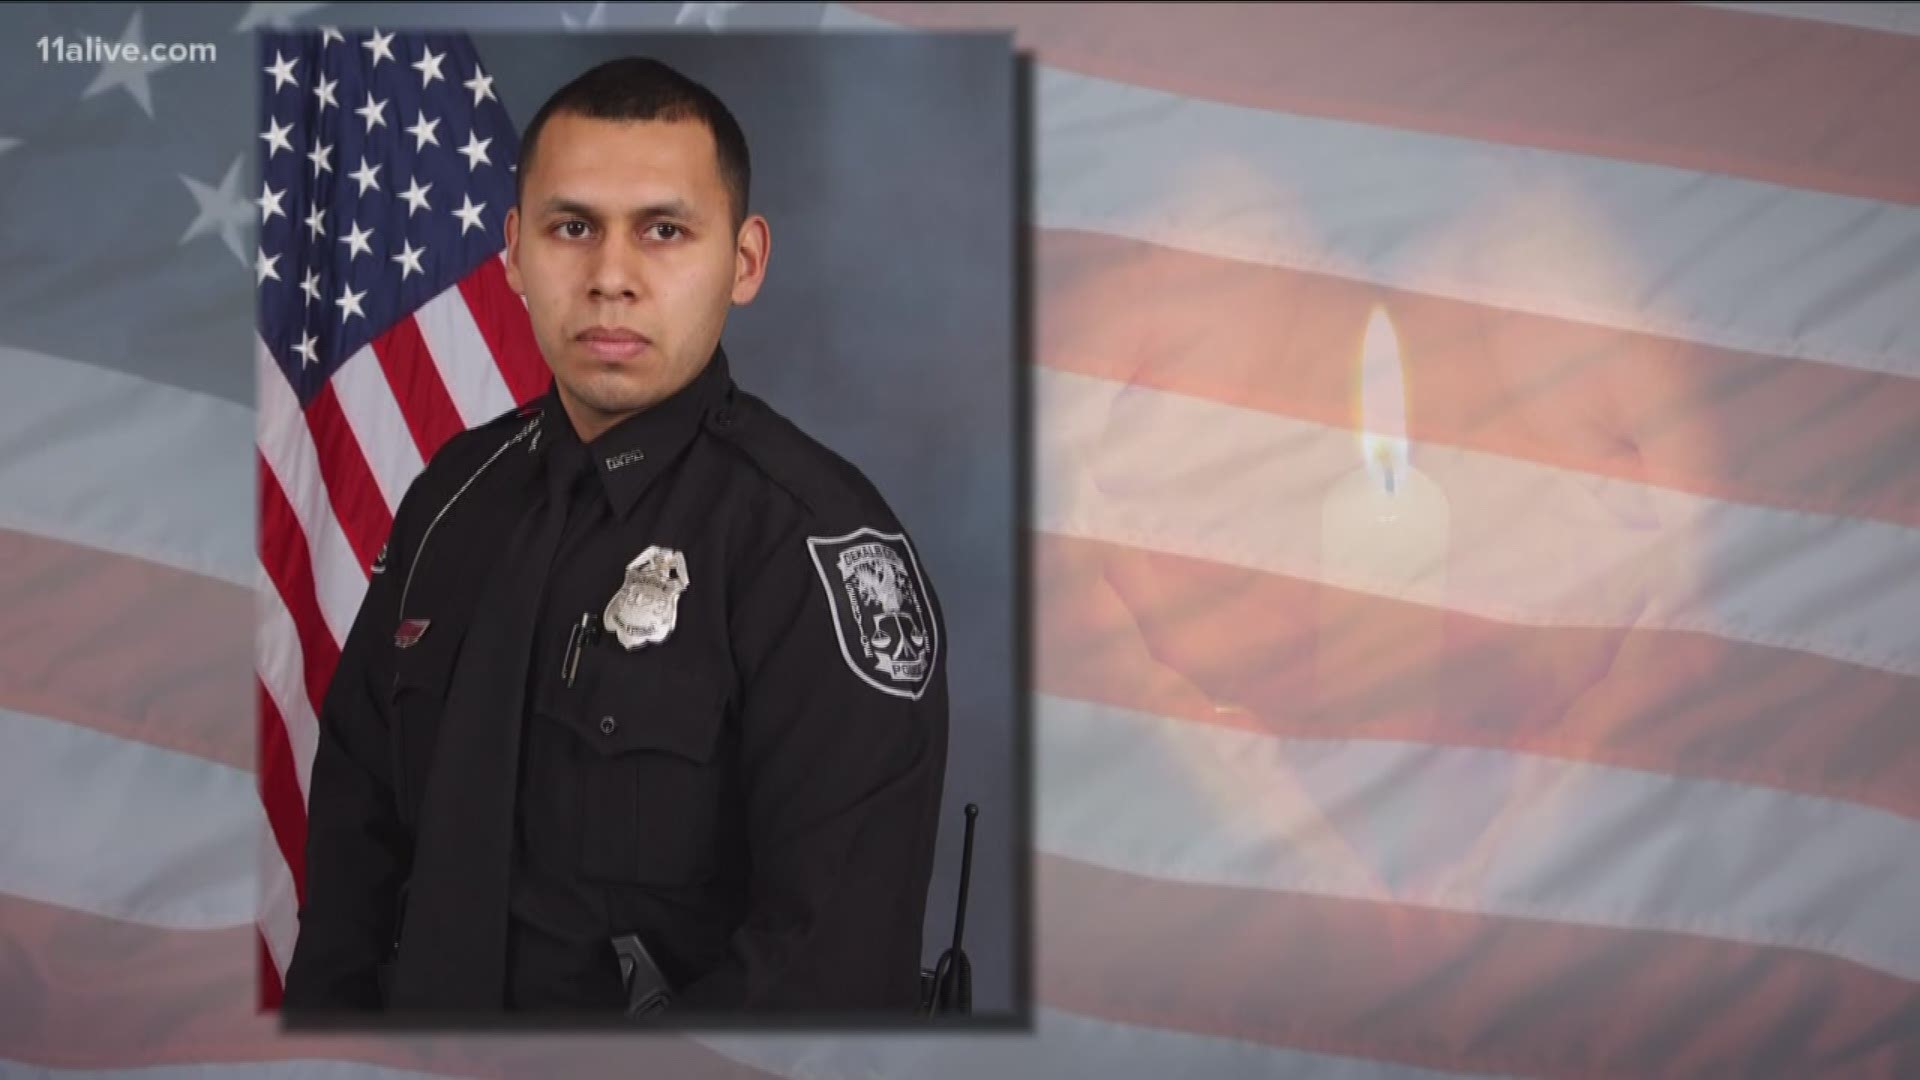 Family and friends of fallen DeKalb County Police officer Edgar Flores said their final goodbyes today in a service held in Flowery Branch.